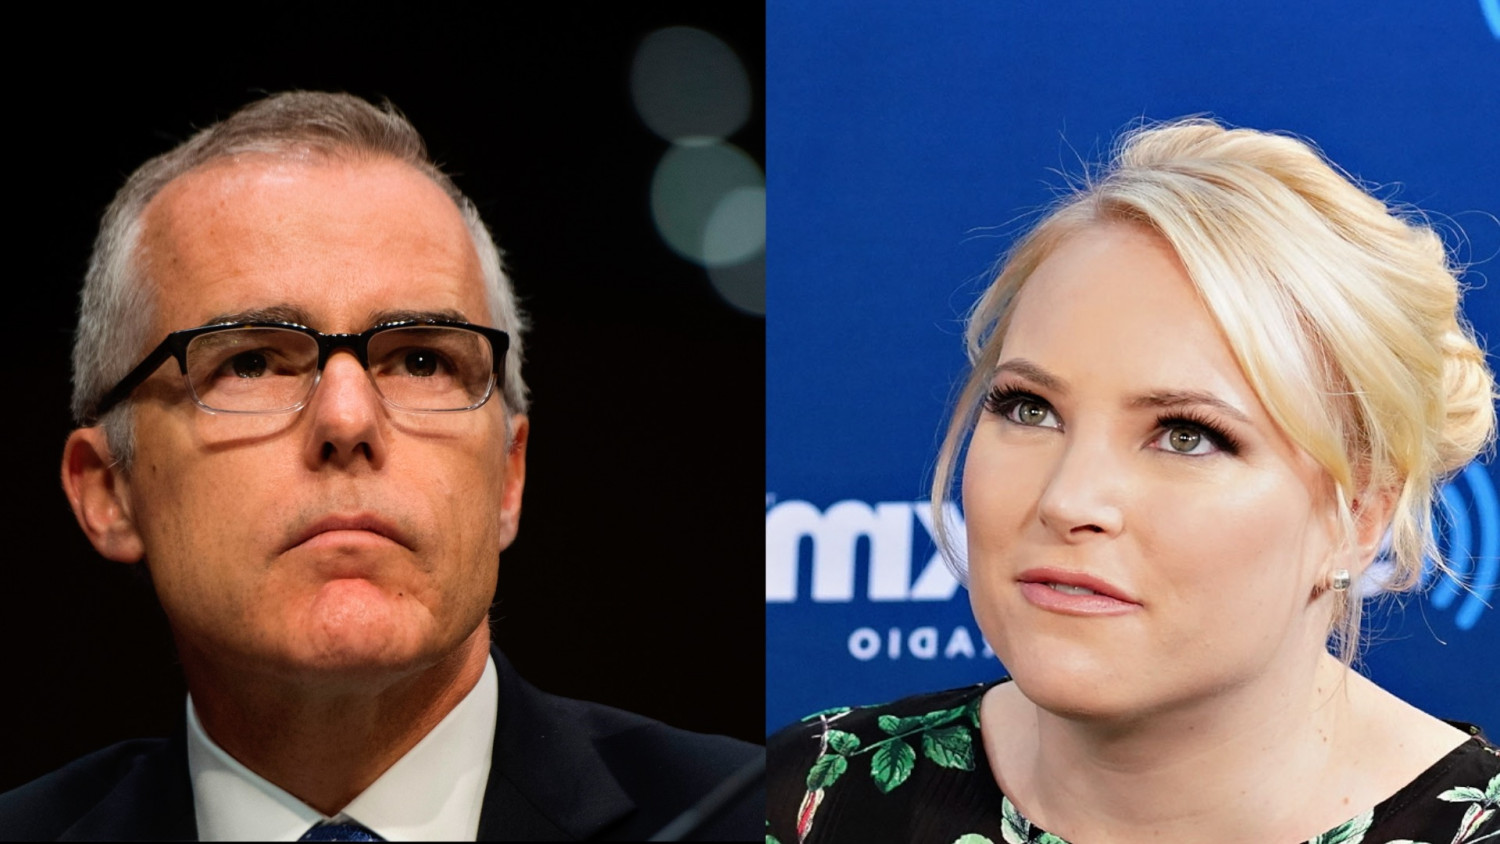 Meghan McCain Slams Andrew McCabe: ‘I Don’t Believe You’re a Reliable Narrator’